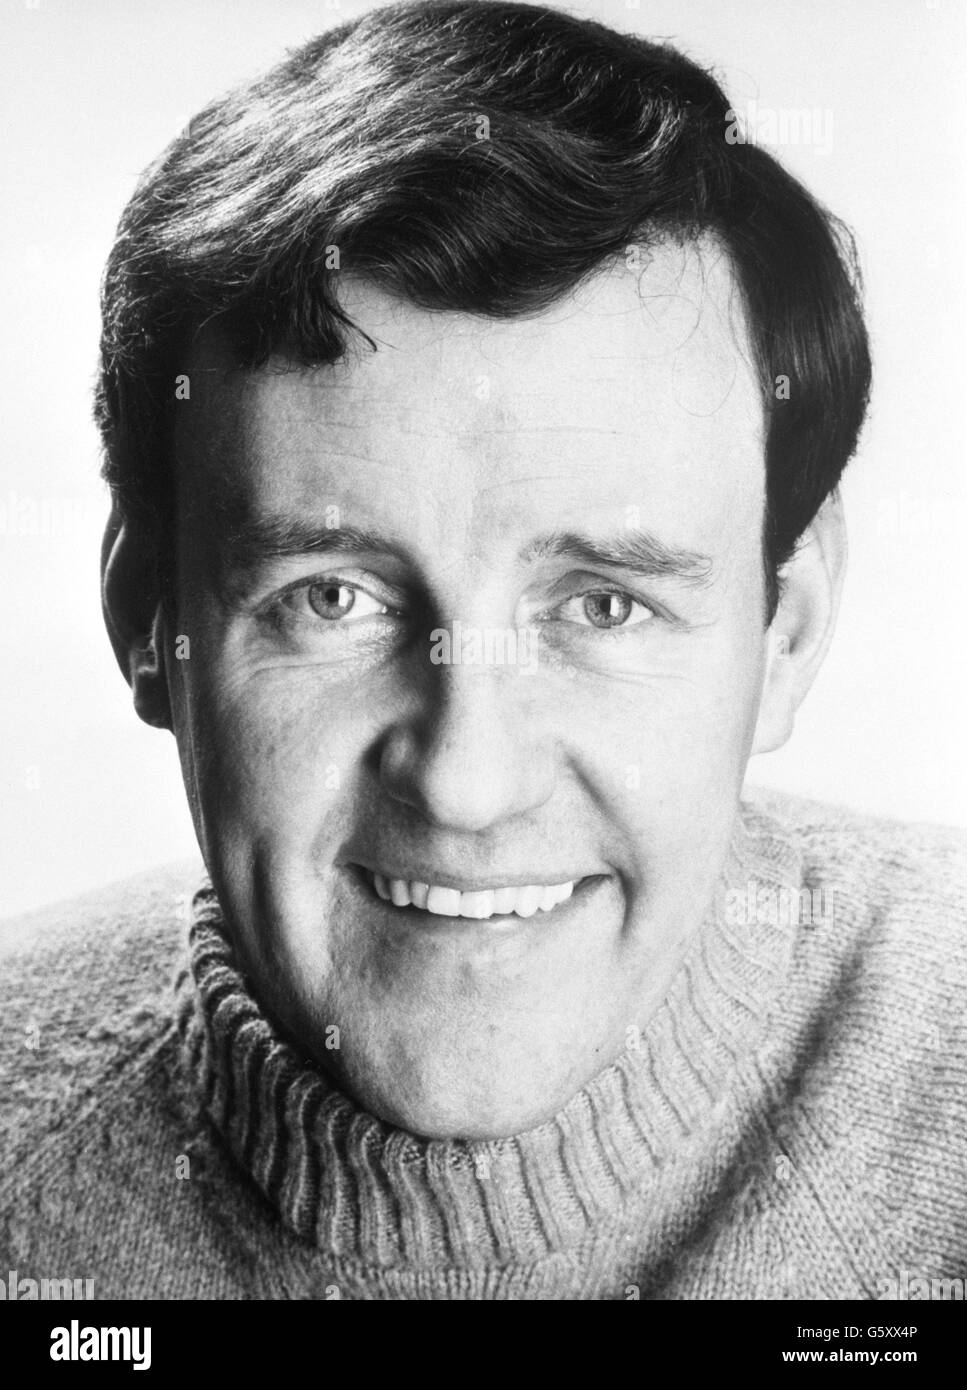 Entertainment, Richard Briers. Stock shot of actor Richard Briers. Stock Photo